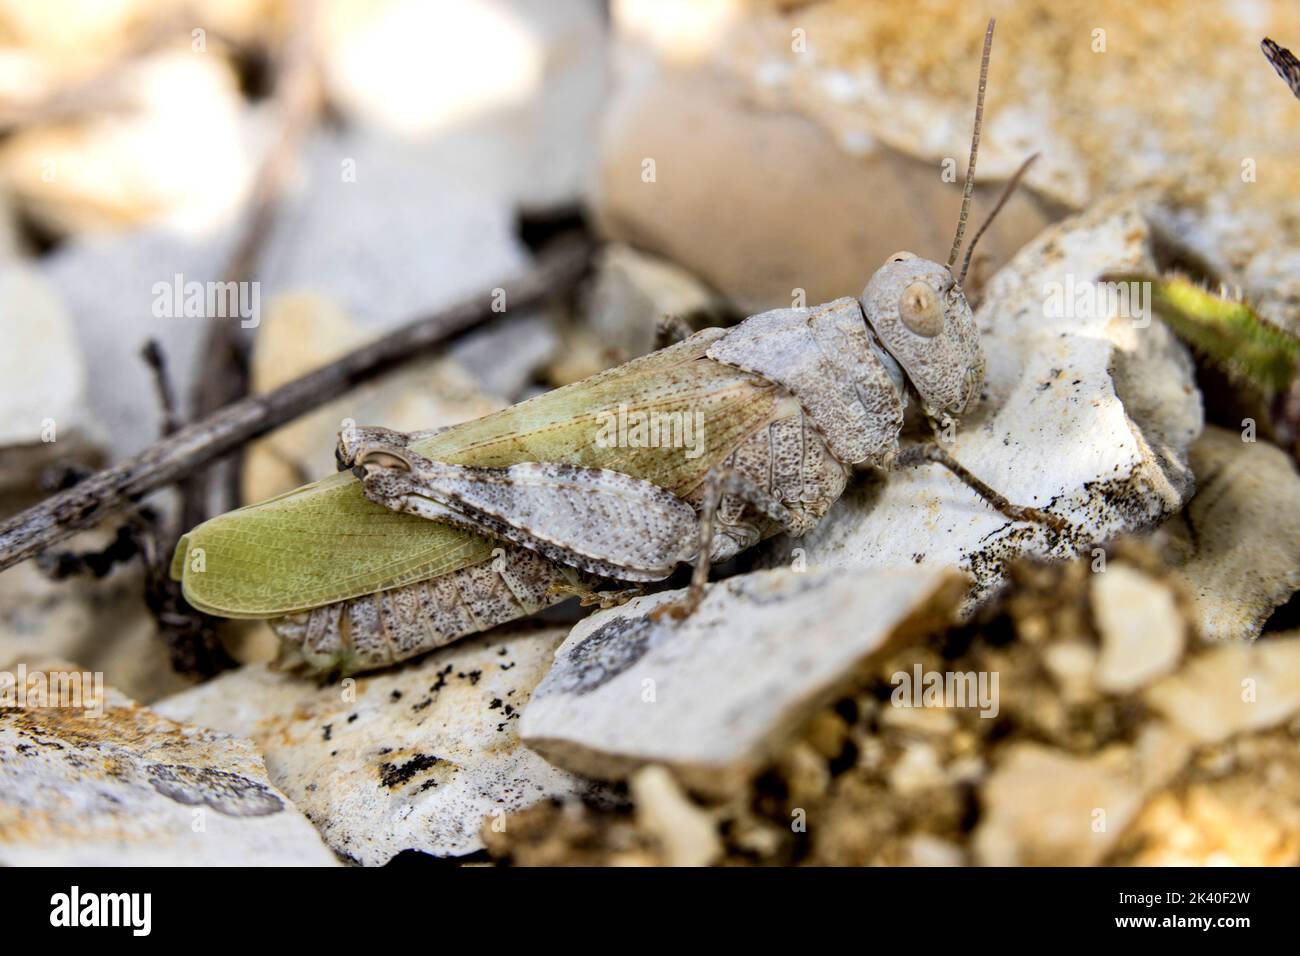 Red-winged grasshopper (Oedipoda germanica), sits on a stone, Germany Stock Photo